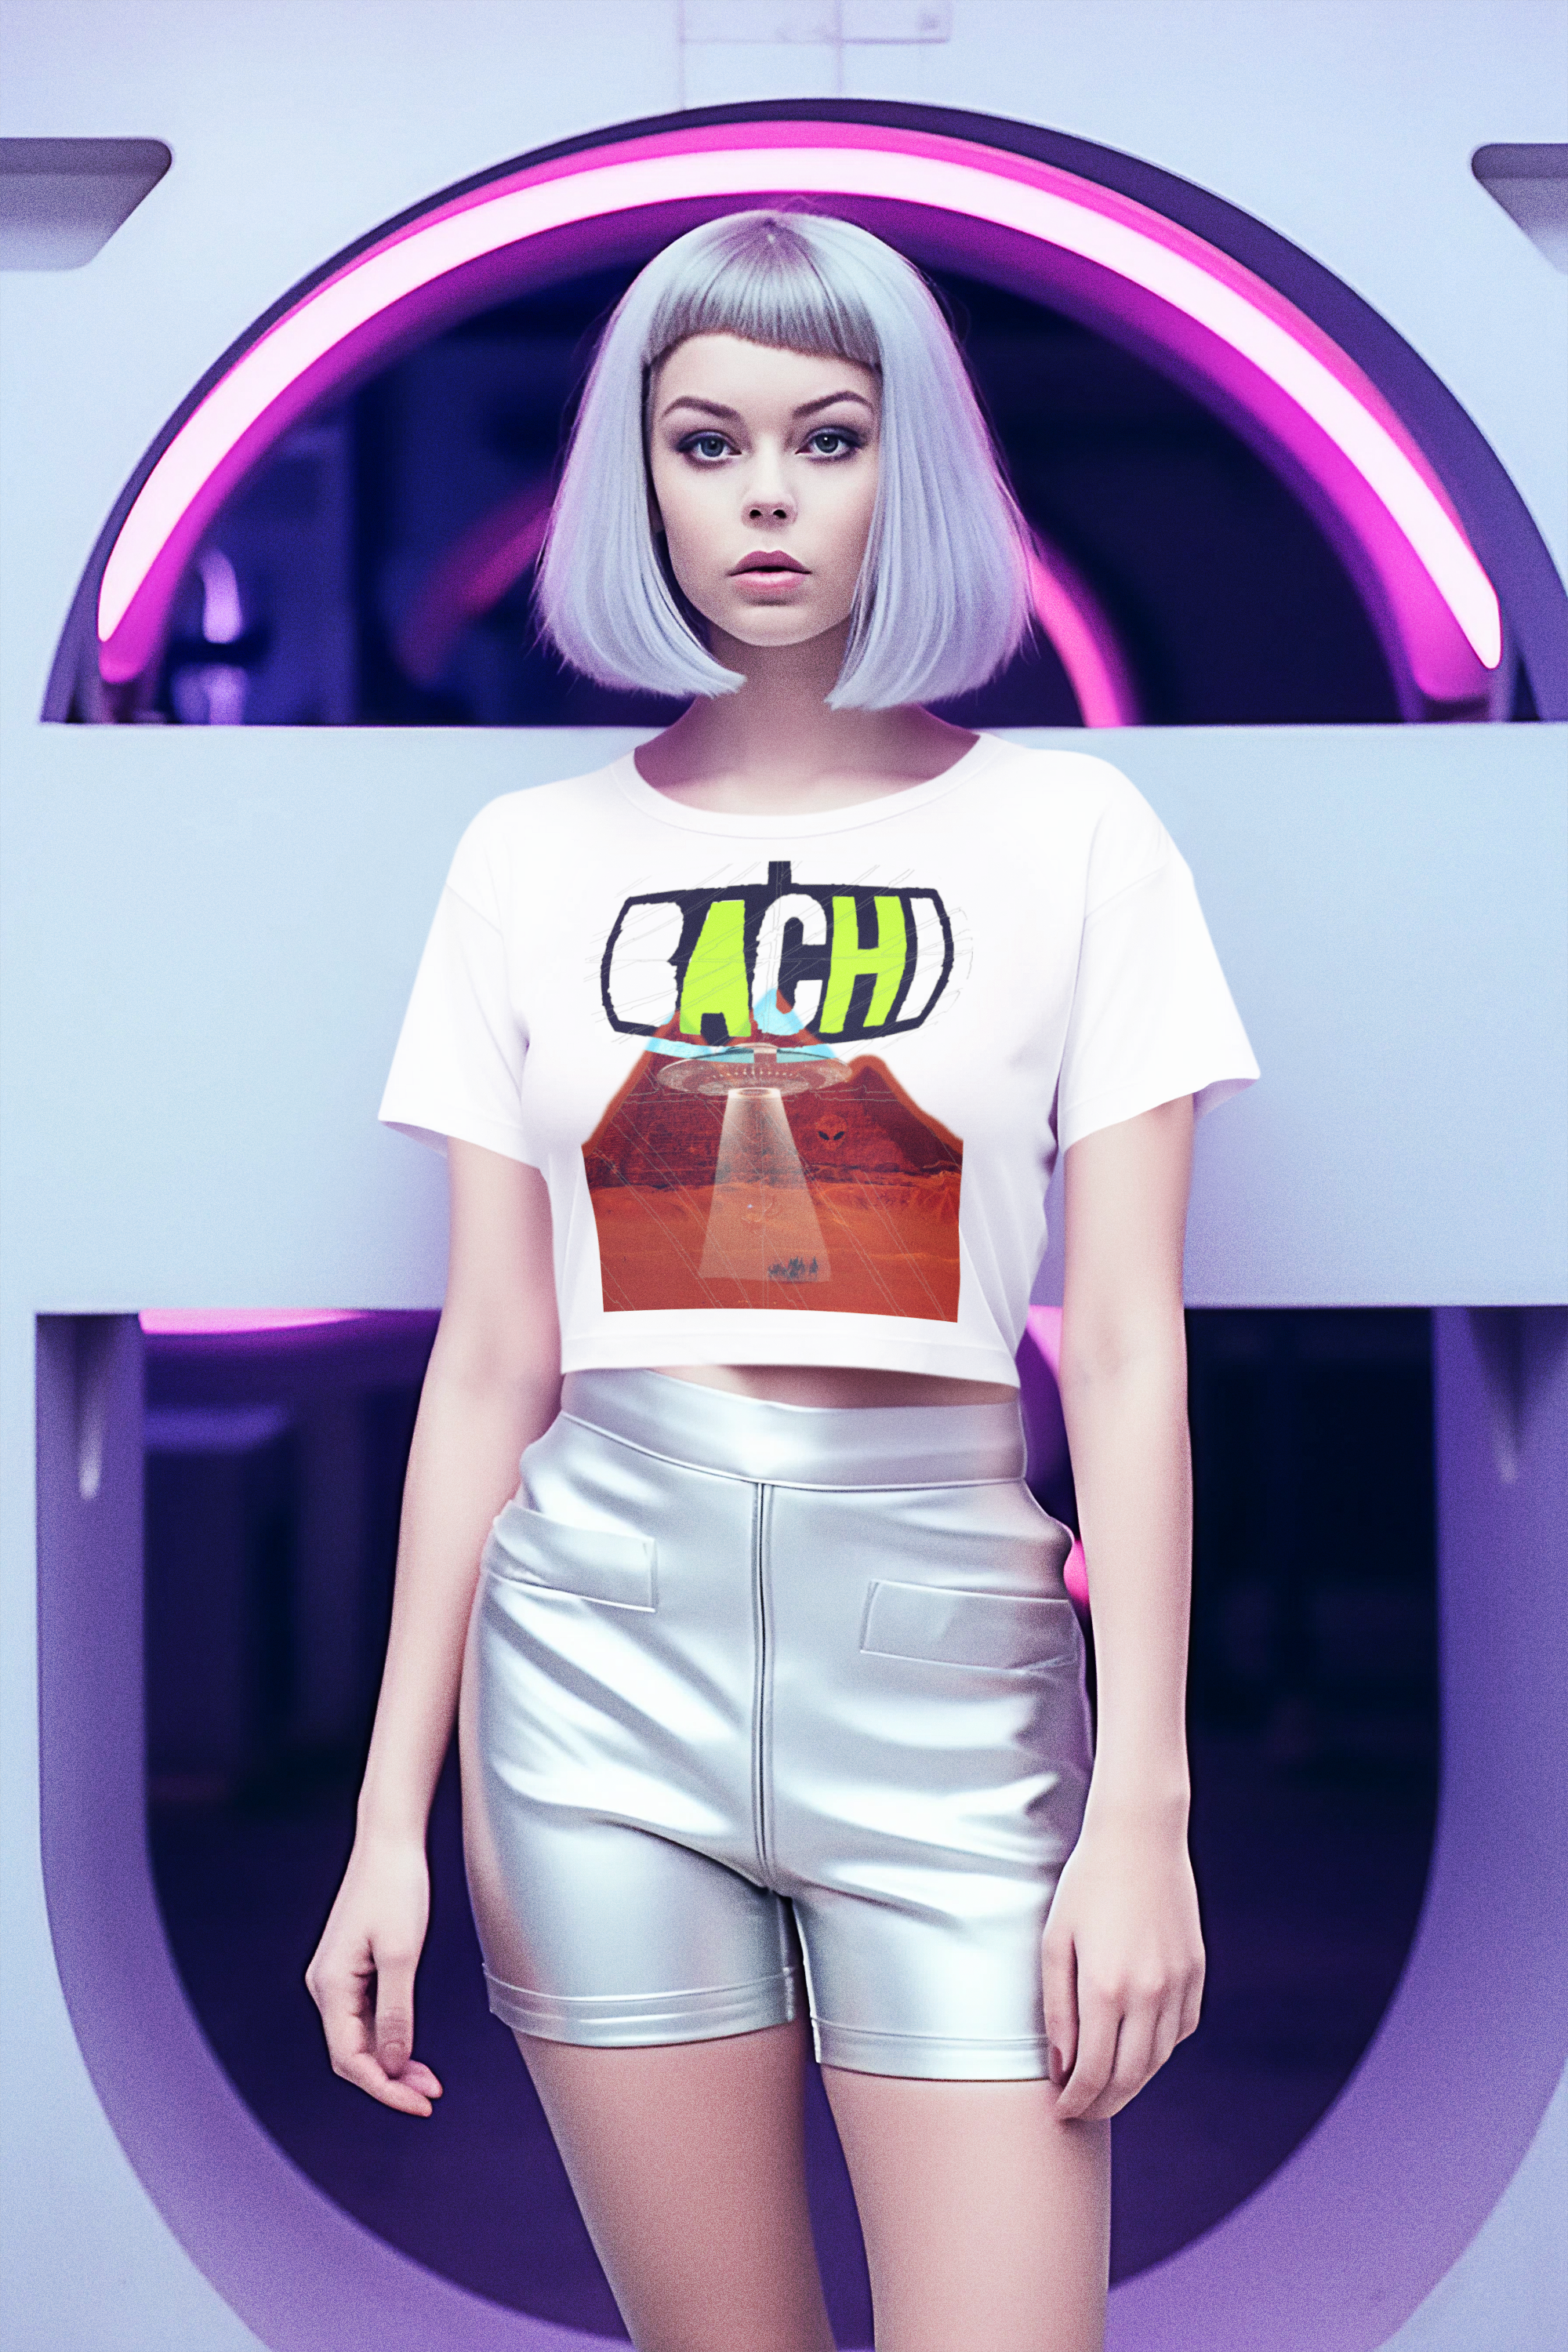 Load video: Join the Alien Nation with Bachi Apparel: Out-of-this-World Fashion for the Bold and Fearless!&quot;